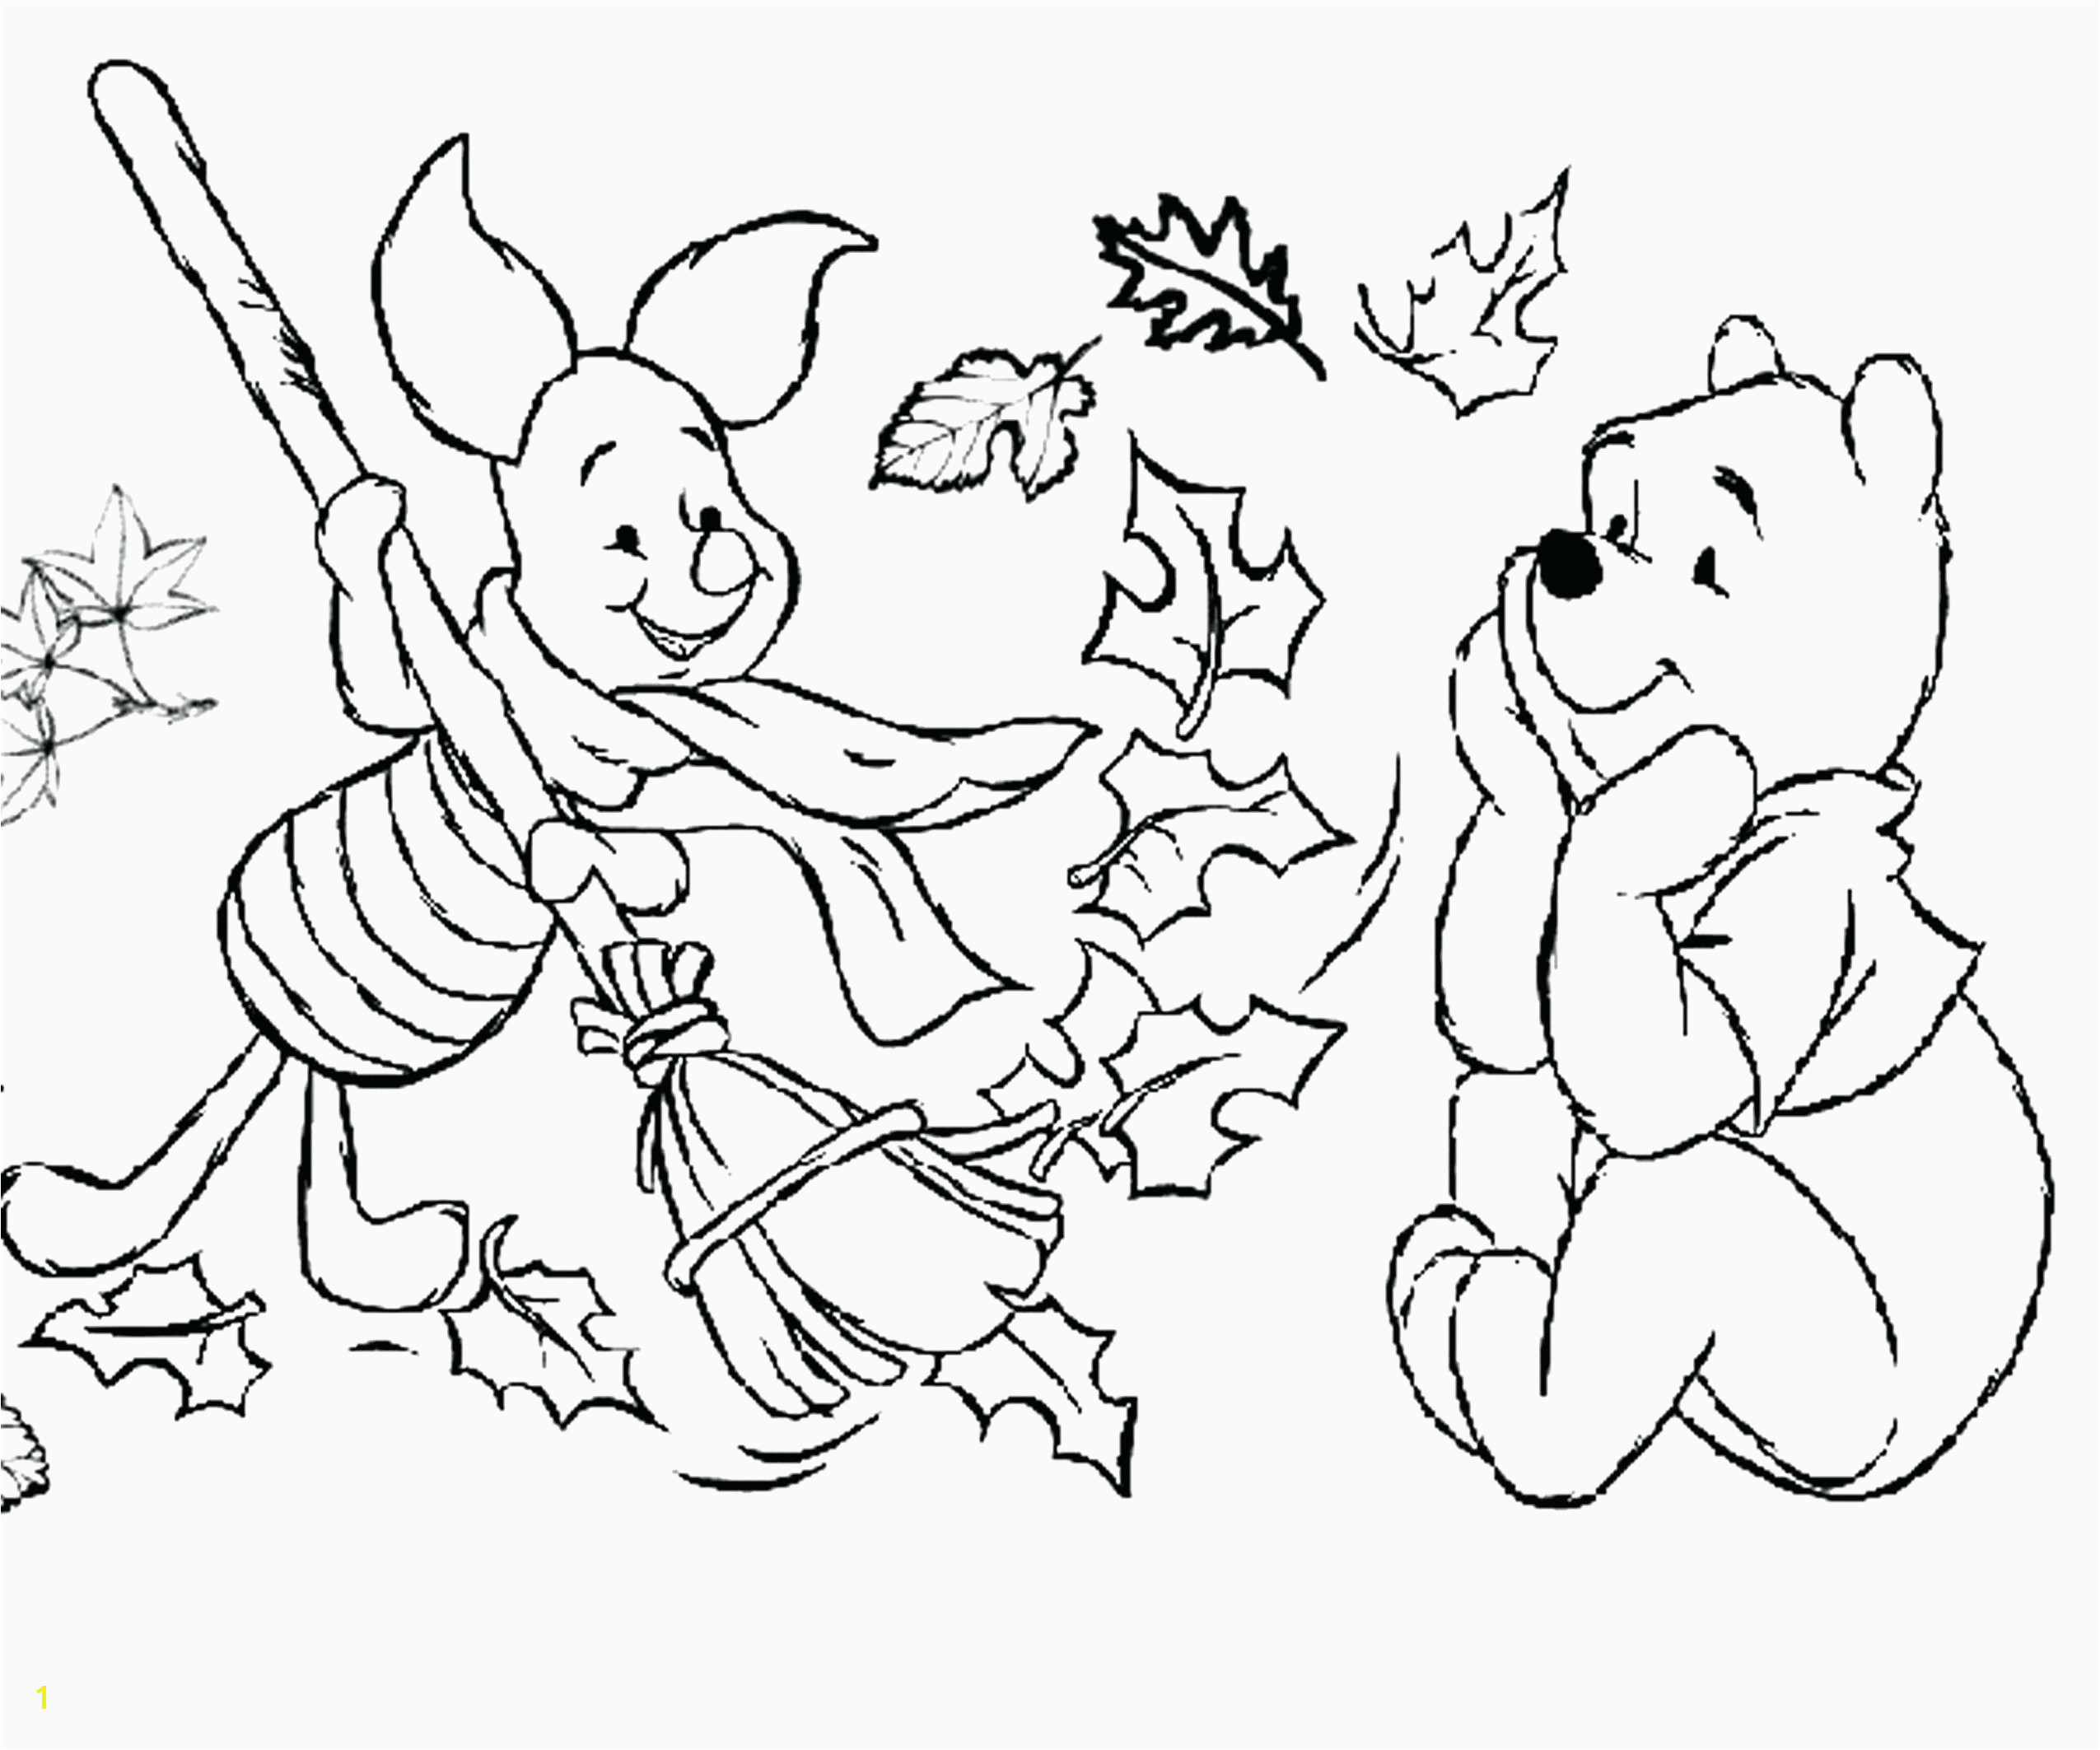 Spider Coloring Pages Preschool Fall Coloring Pages 0d Coloring Page Fall Coloring Pages for Kids